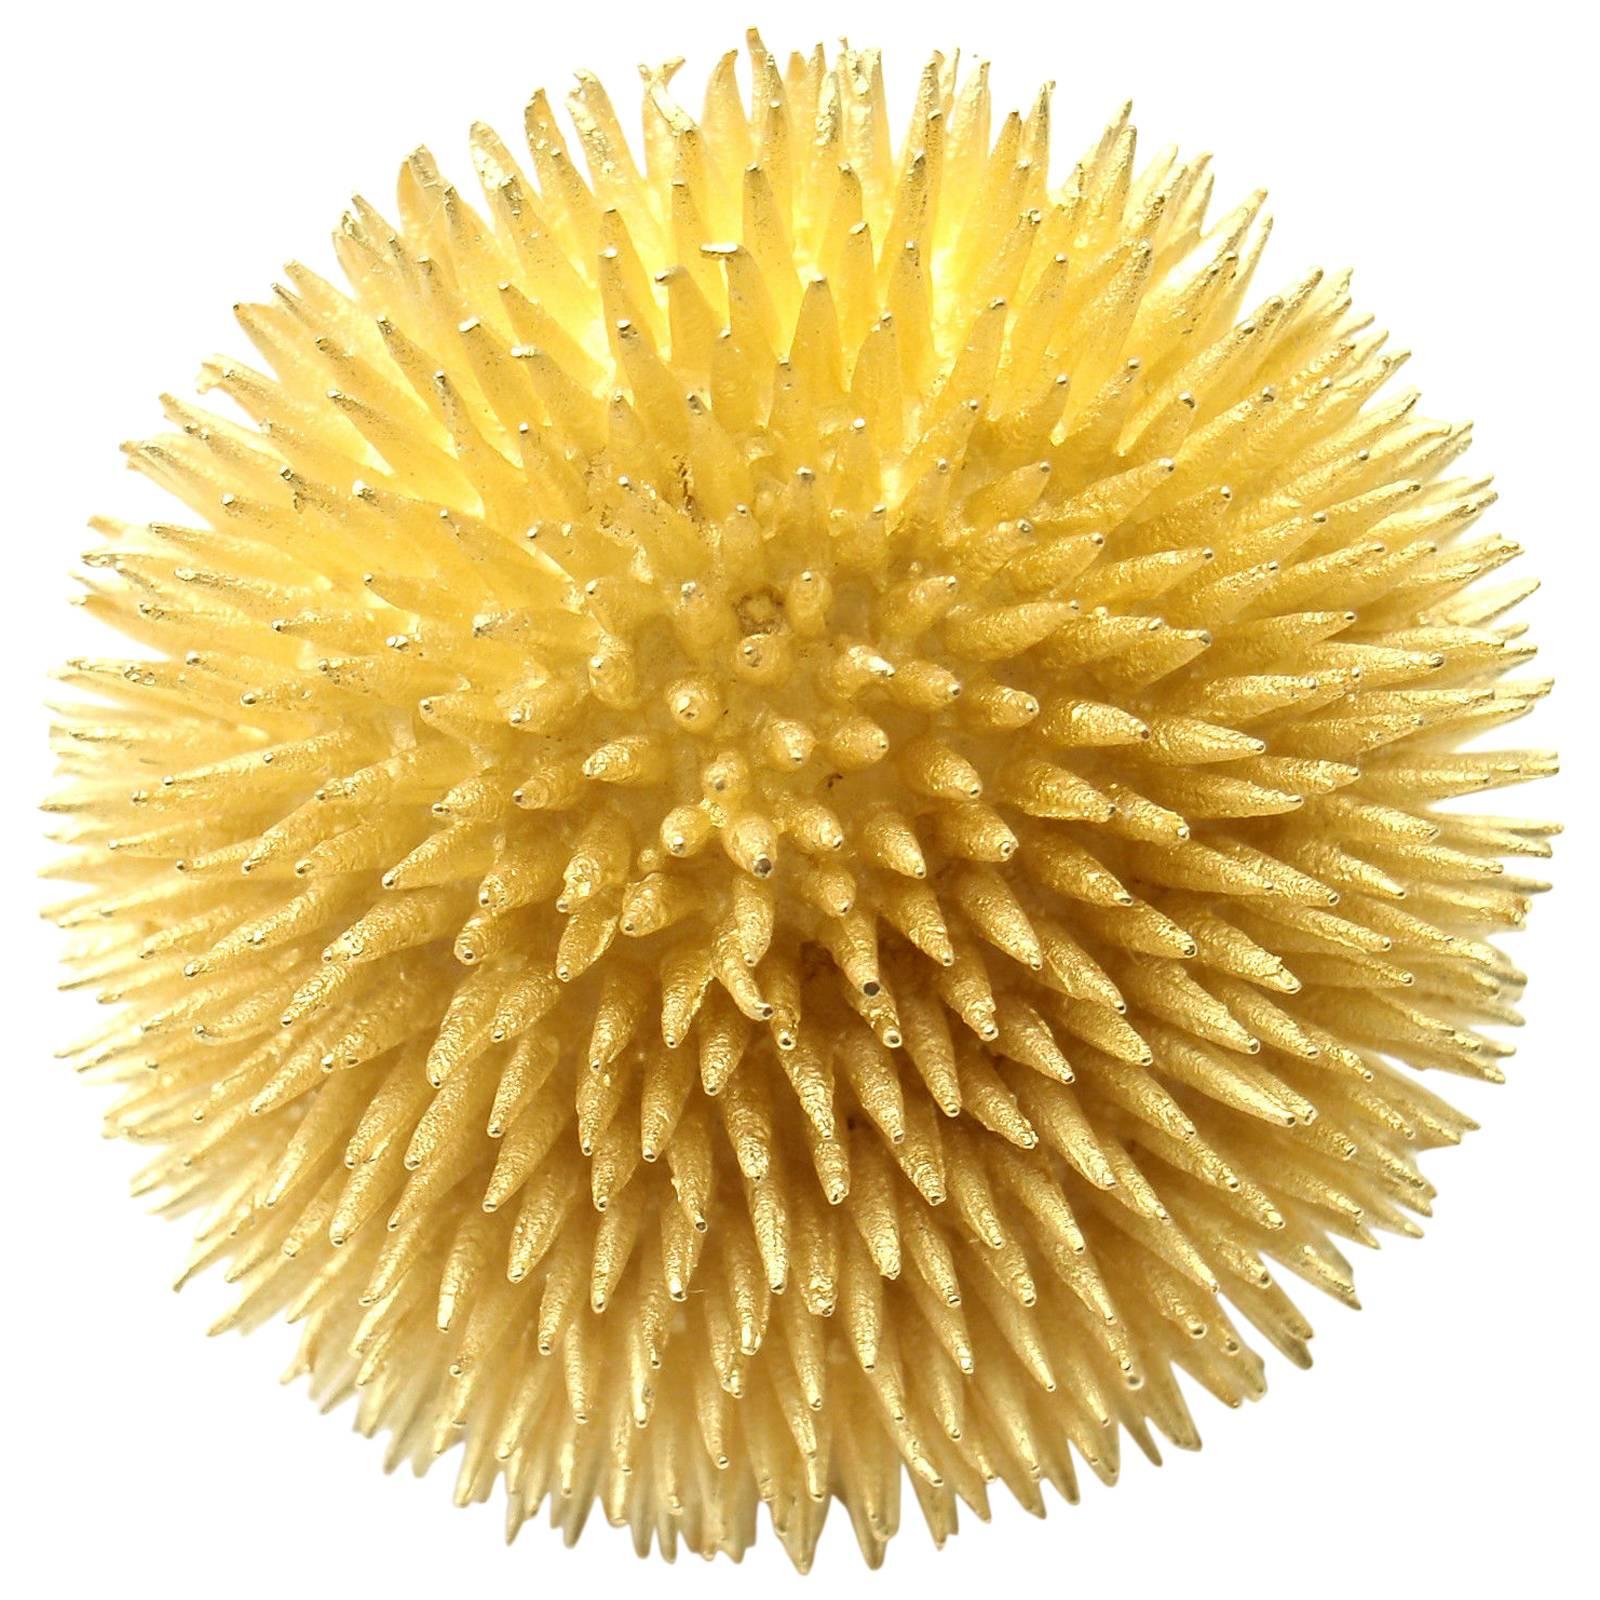 Tiffany & Co  Extra Large Sea Urchin Yellow Gold Brooch